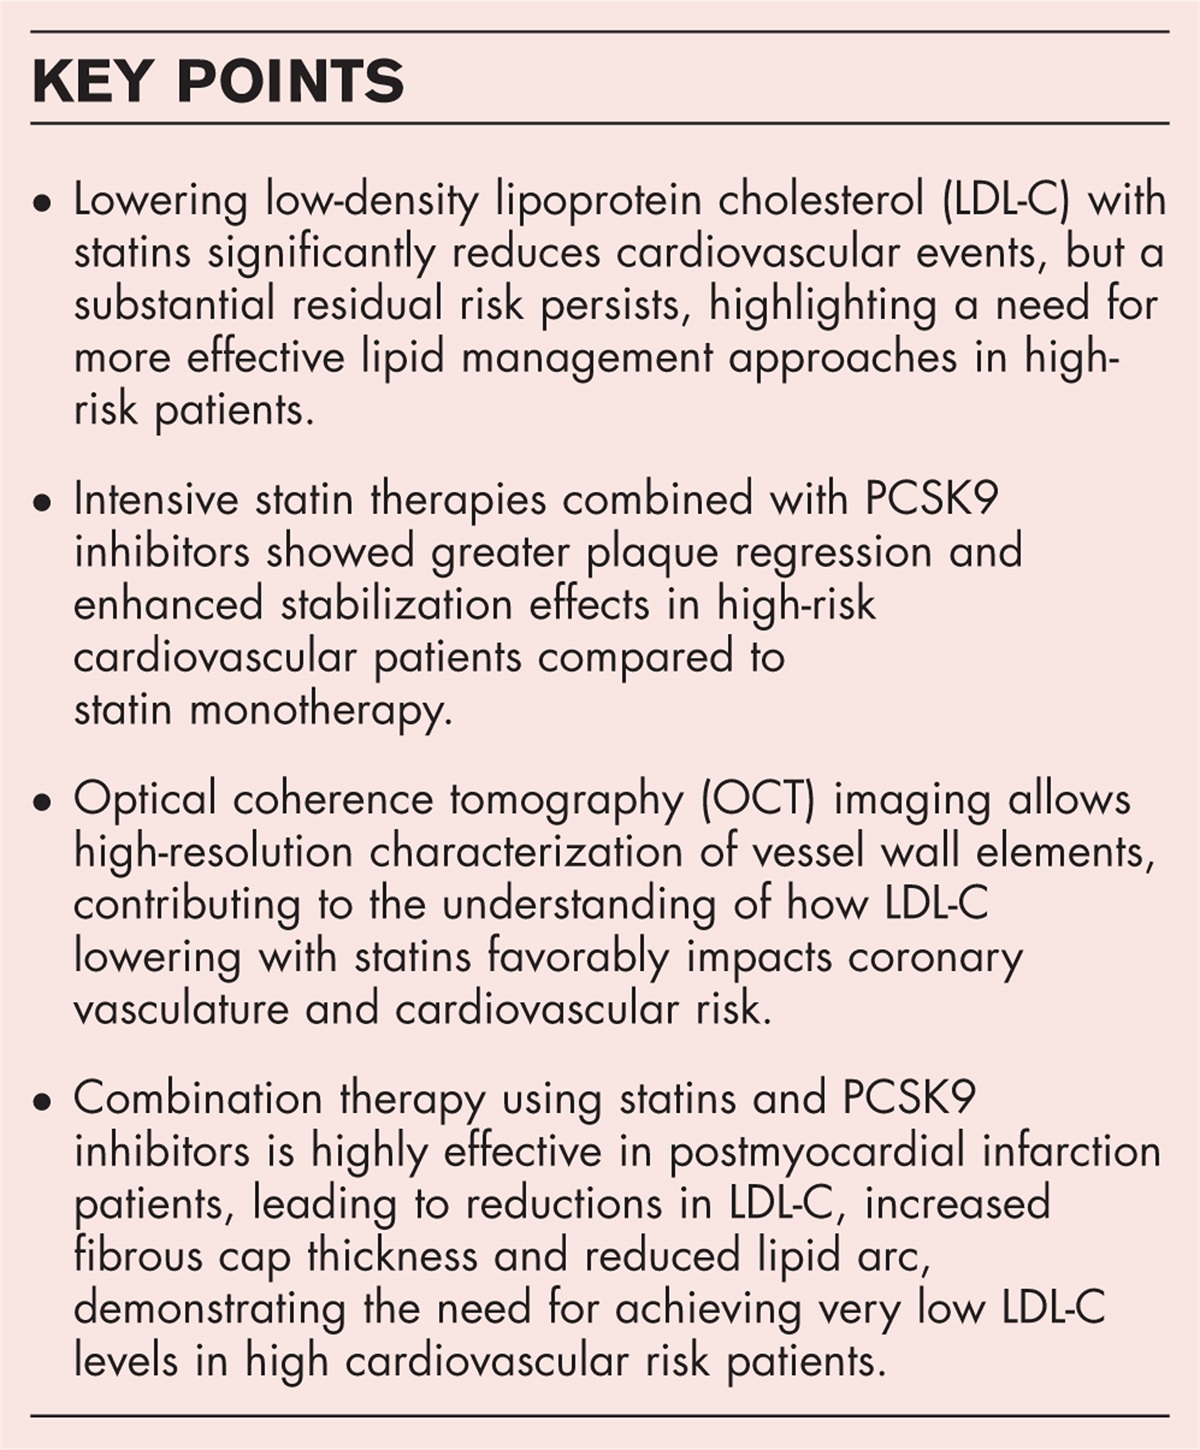 Impact of PCSK9 inhibitors on coronary atheroma phenotype following myocardial infarction: insights from intravascular imaging